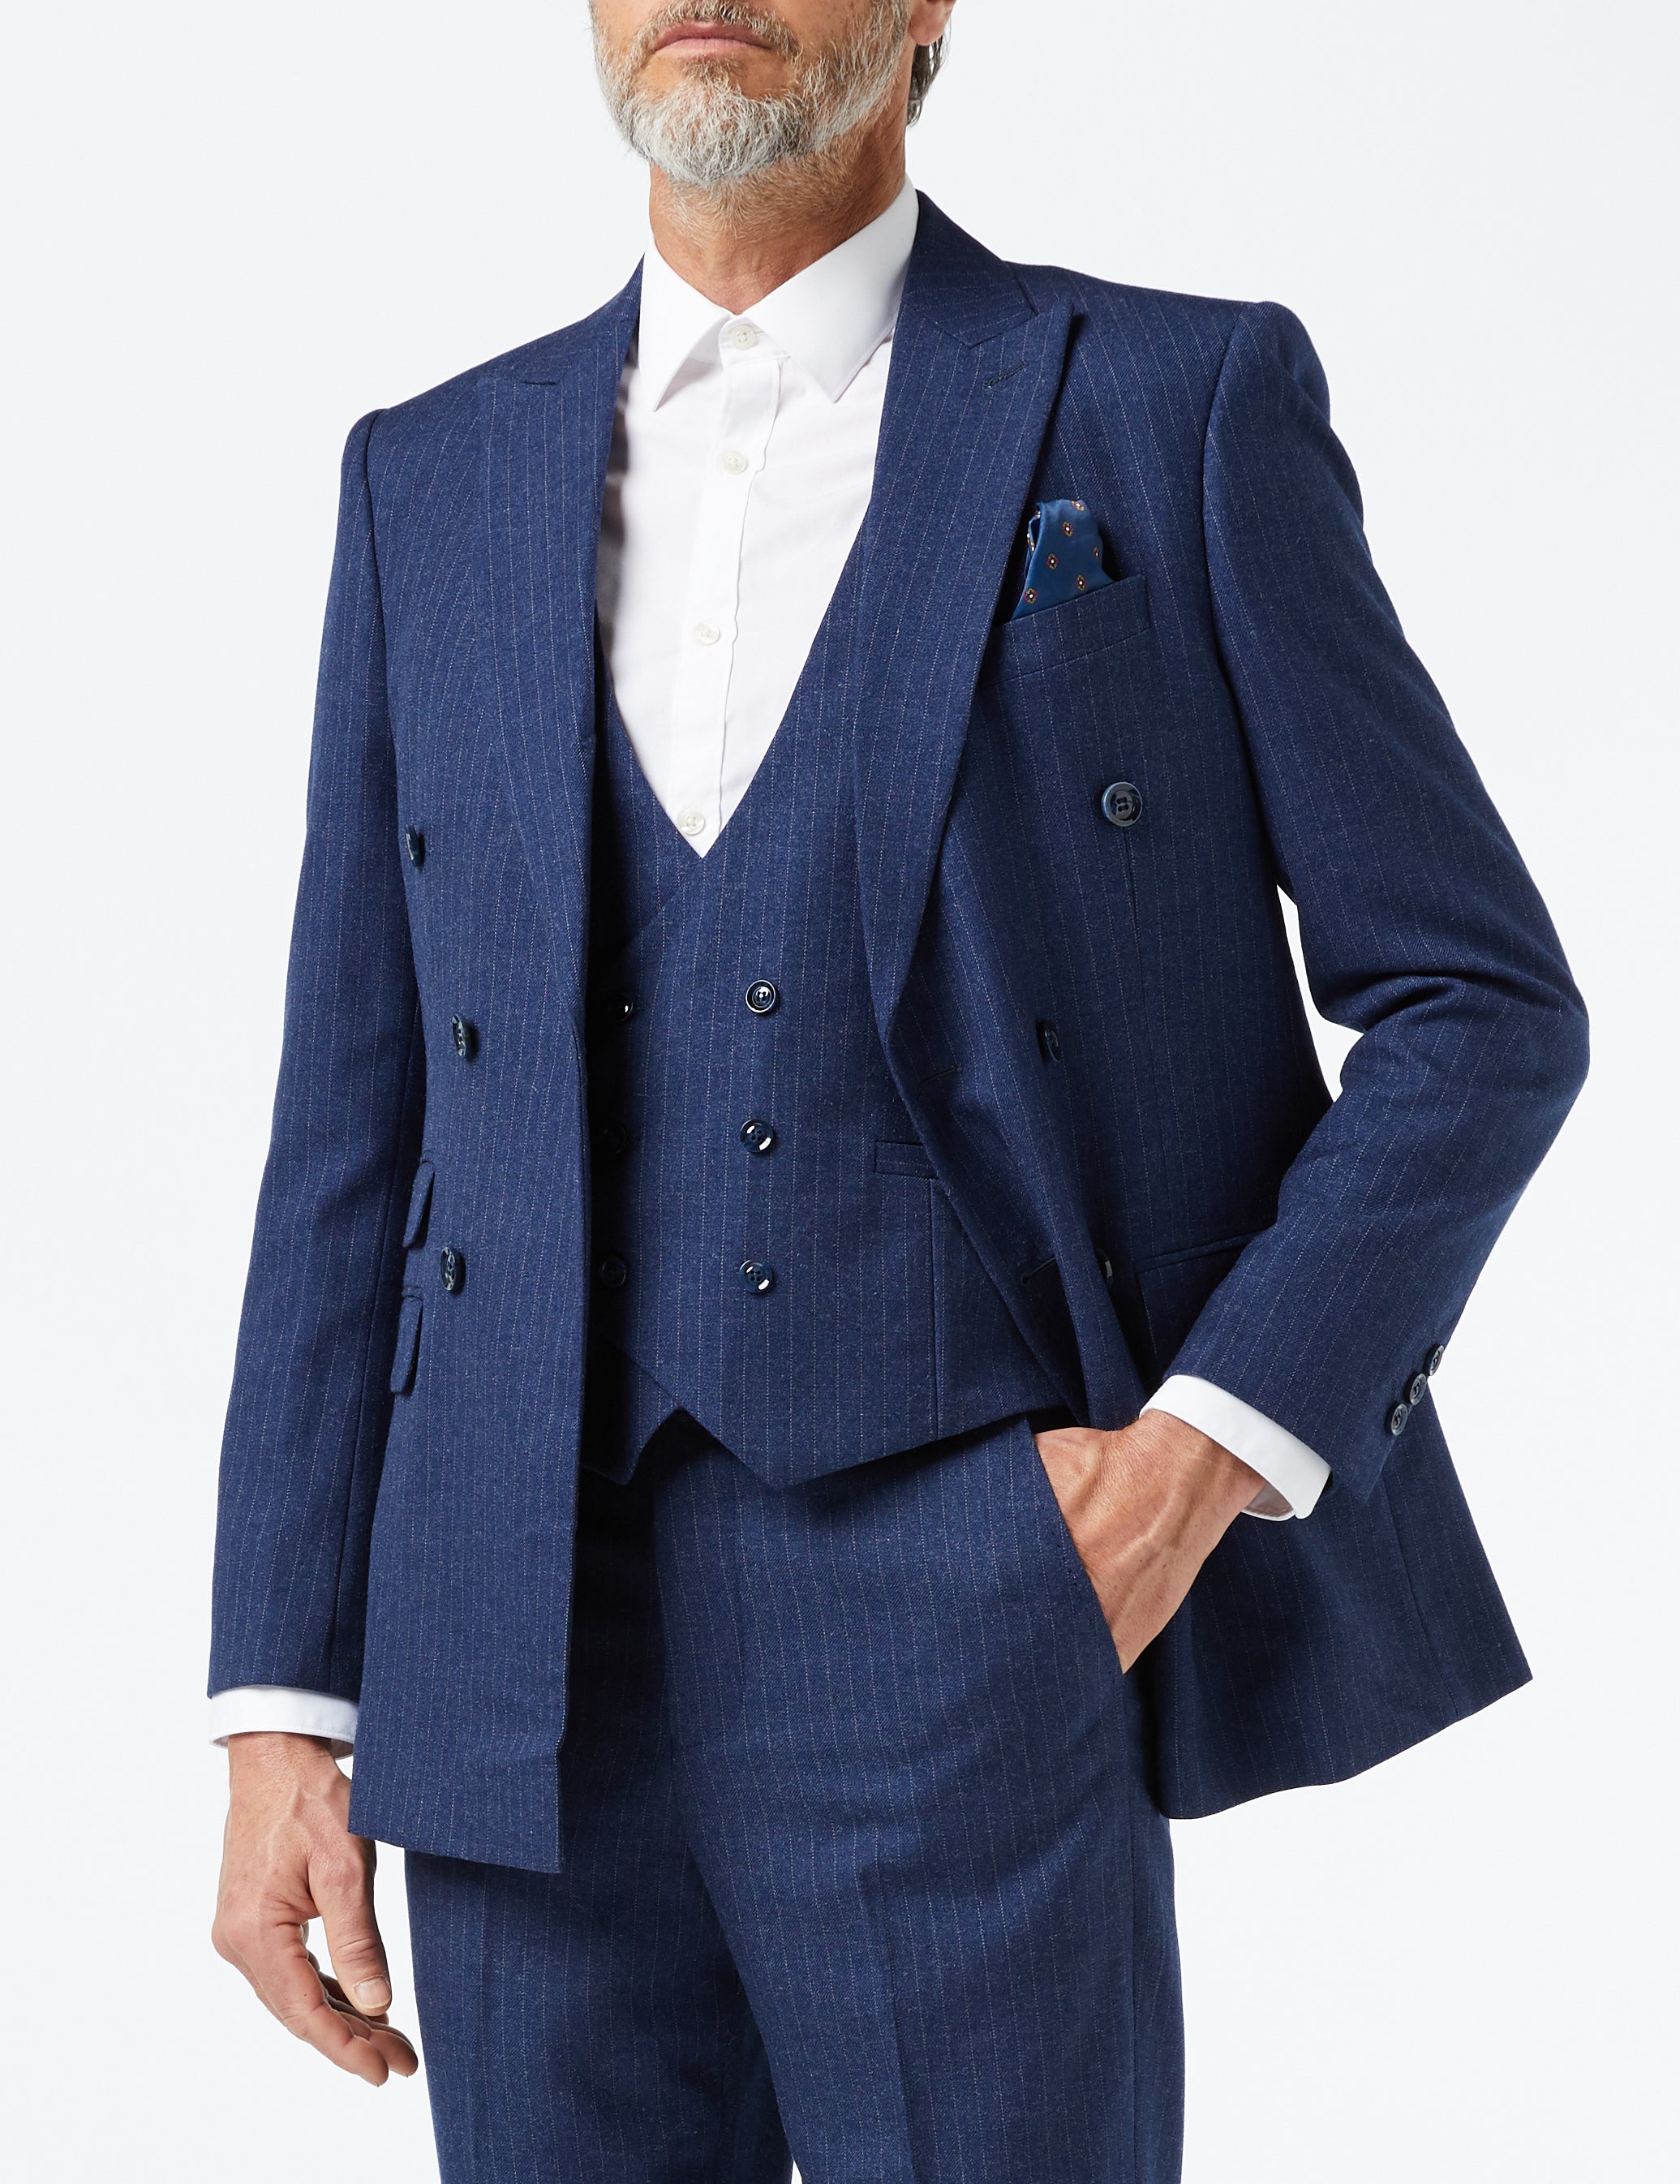 Mens 3 Piece Double Breasted Suit Blue Pinstripe 1920 Retro Gatsby Tailored Fit